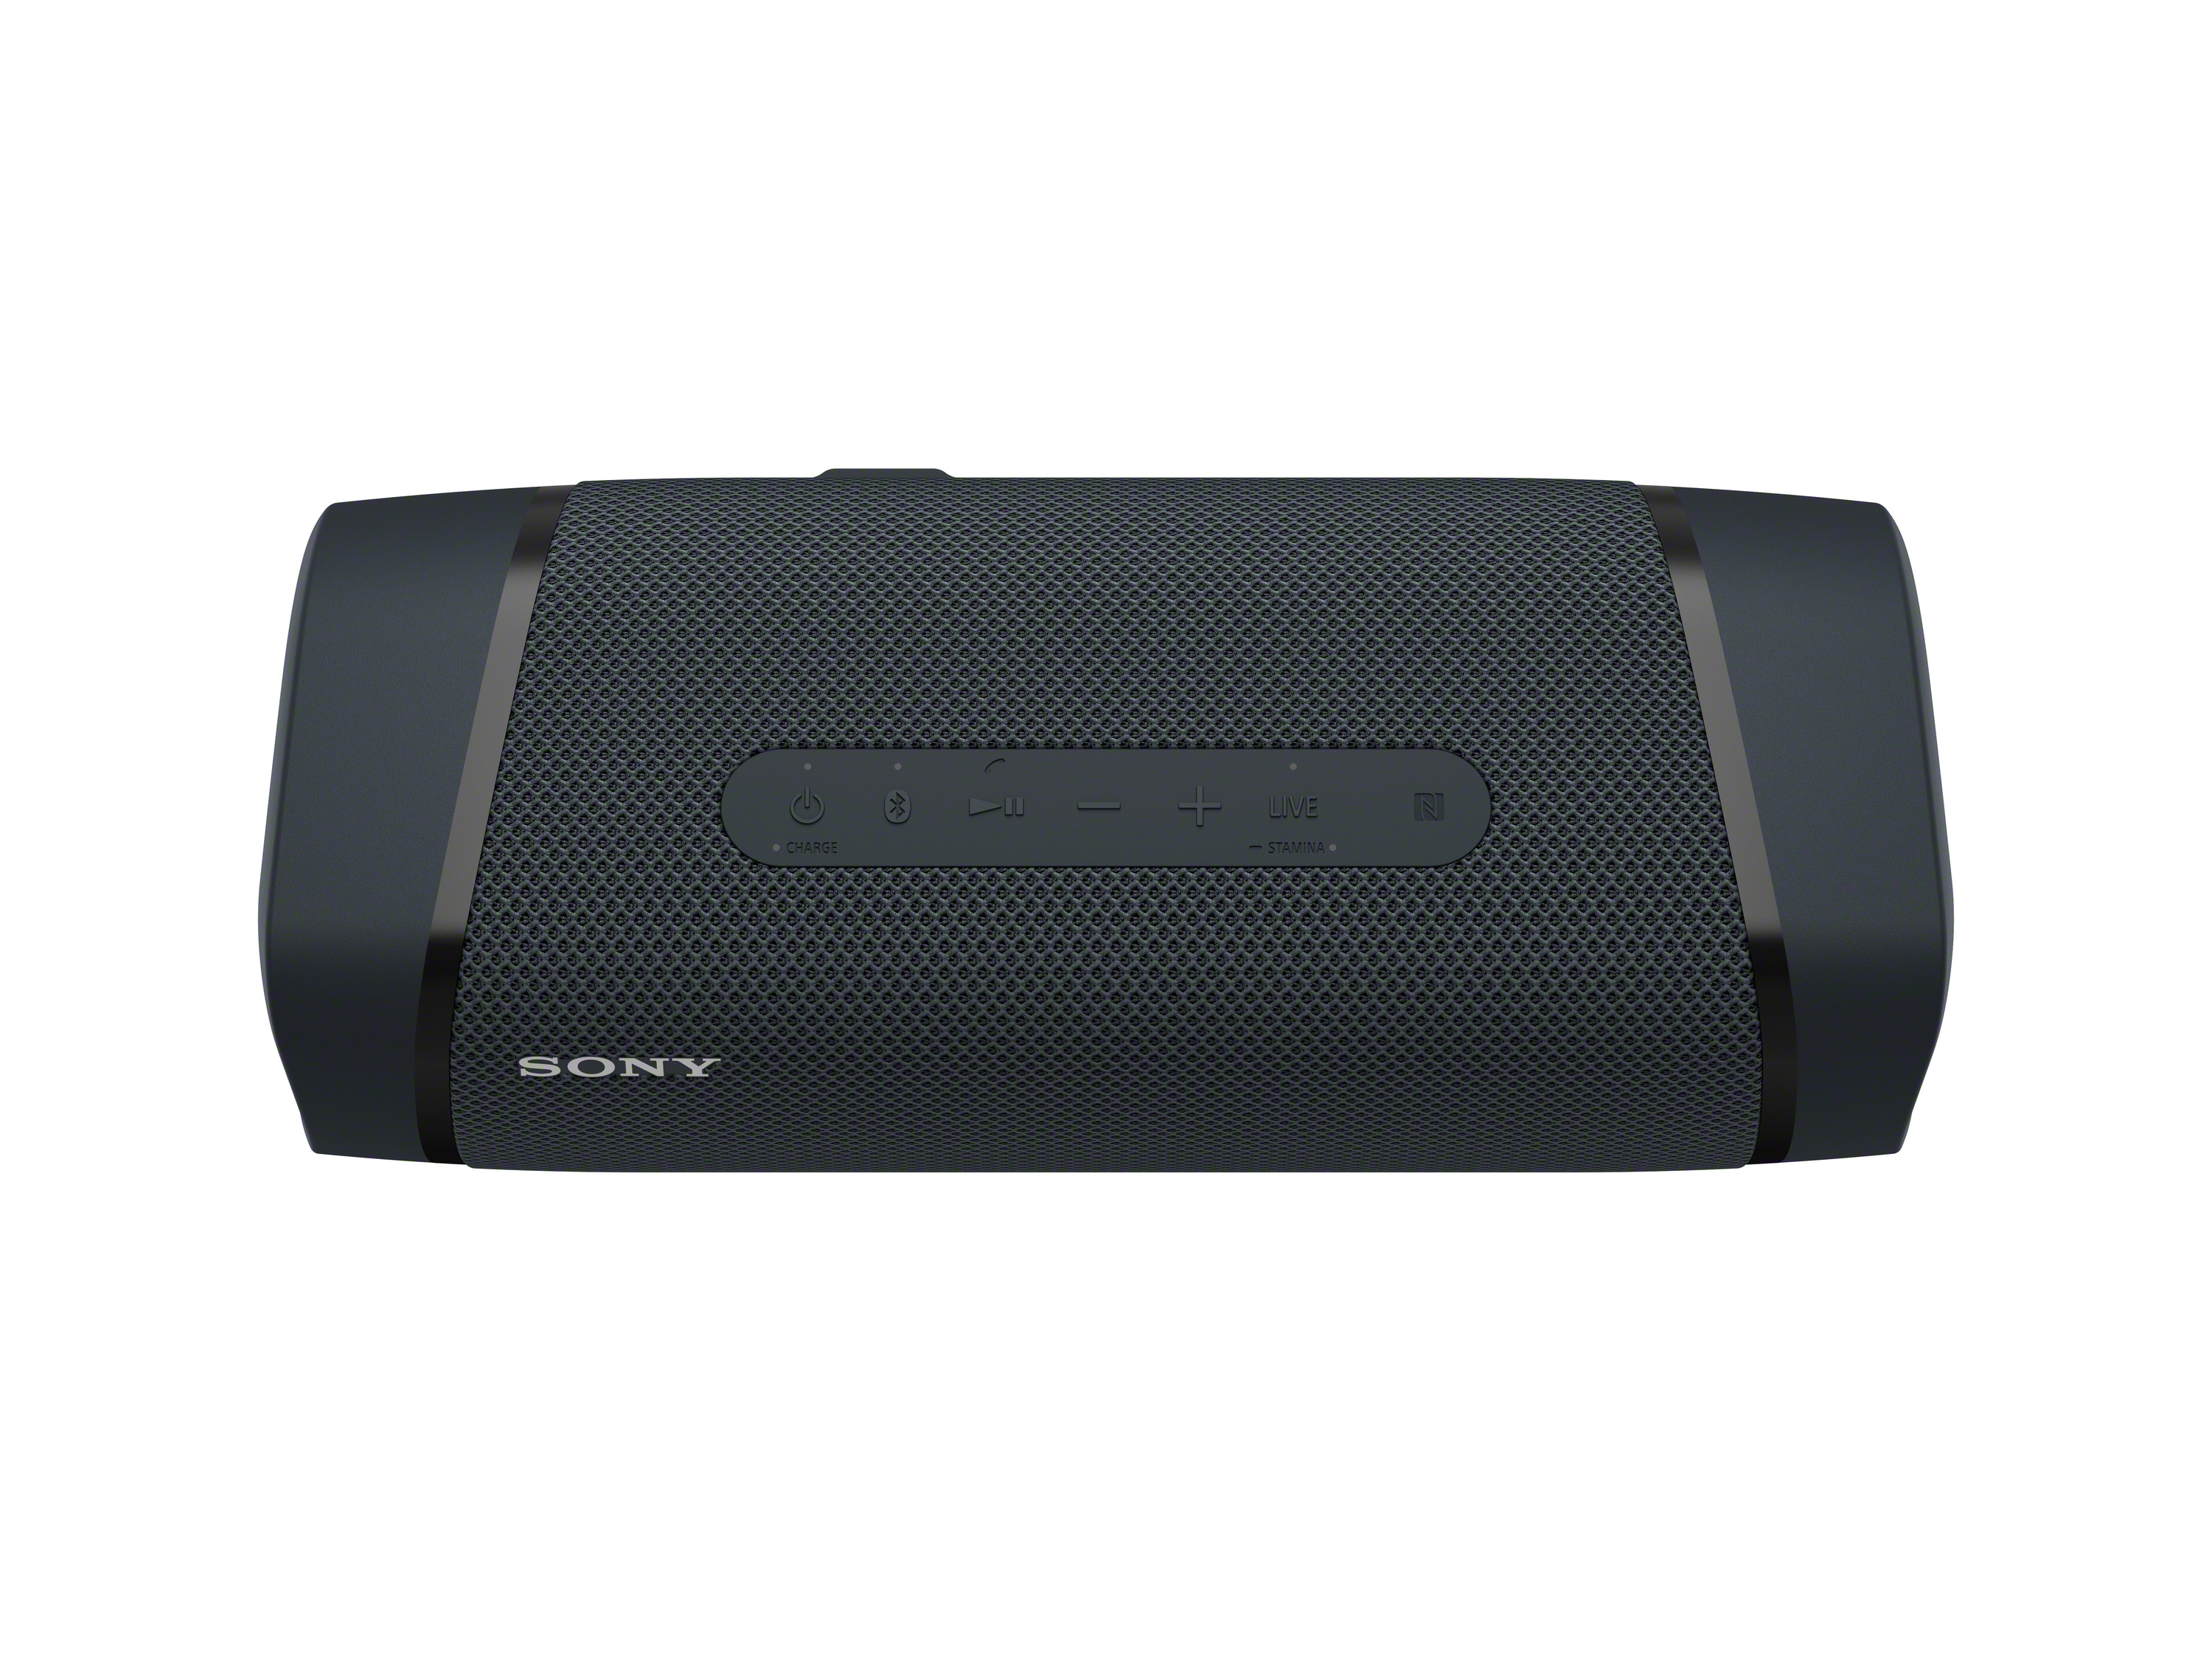 Sony SRSXB33 Black Wireless Waterproof Portable Bluetooth Speaker with Extra Bass (2020) - image 5 of 15